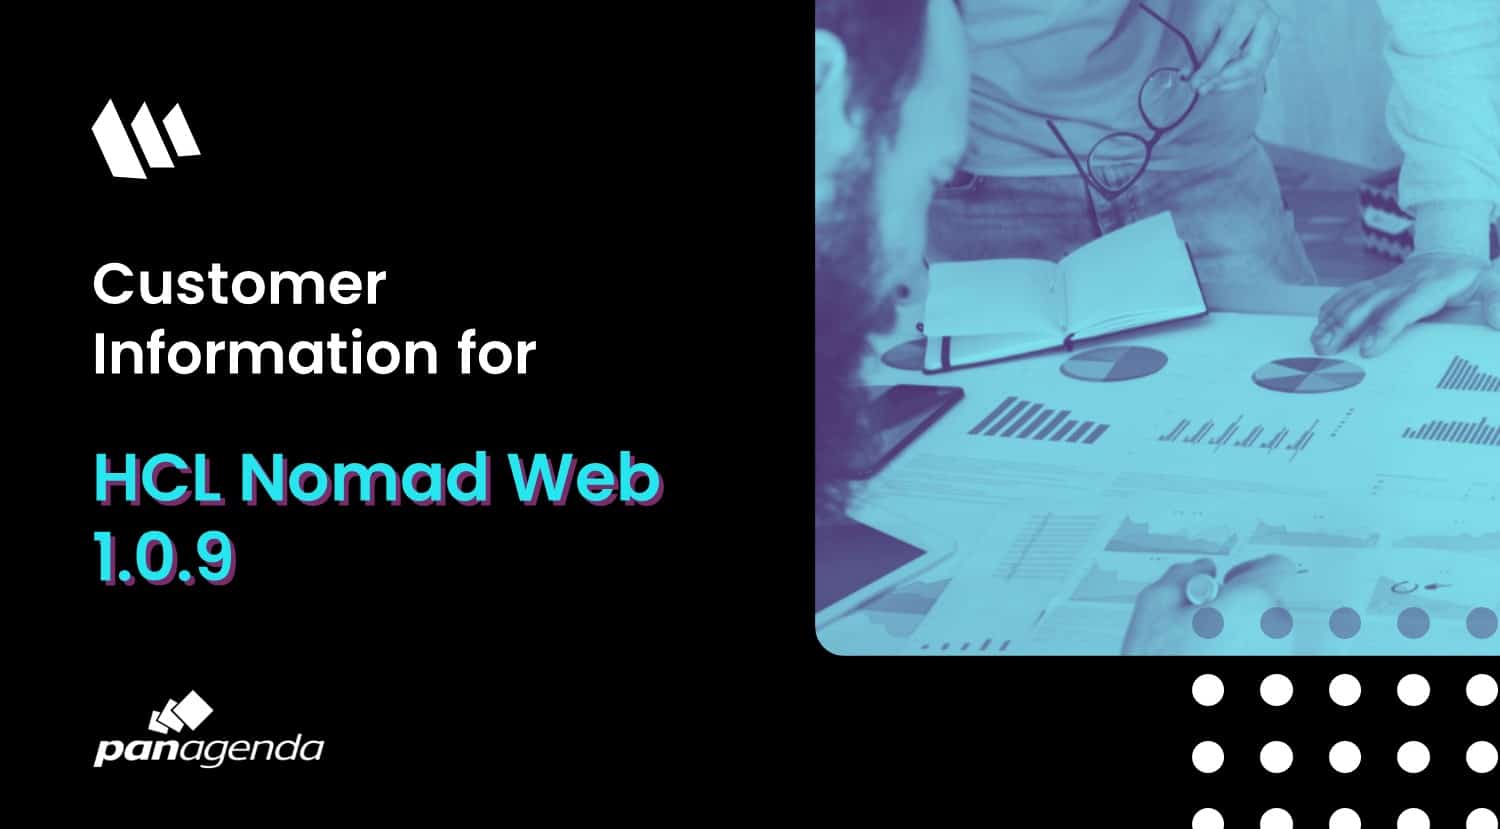 Customer Information for HCL Nomad Web 1.0.9